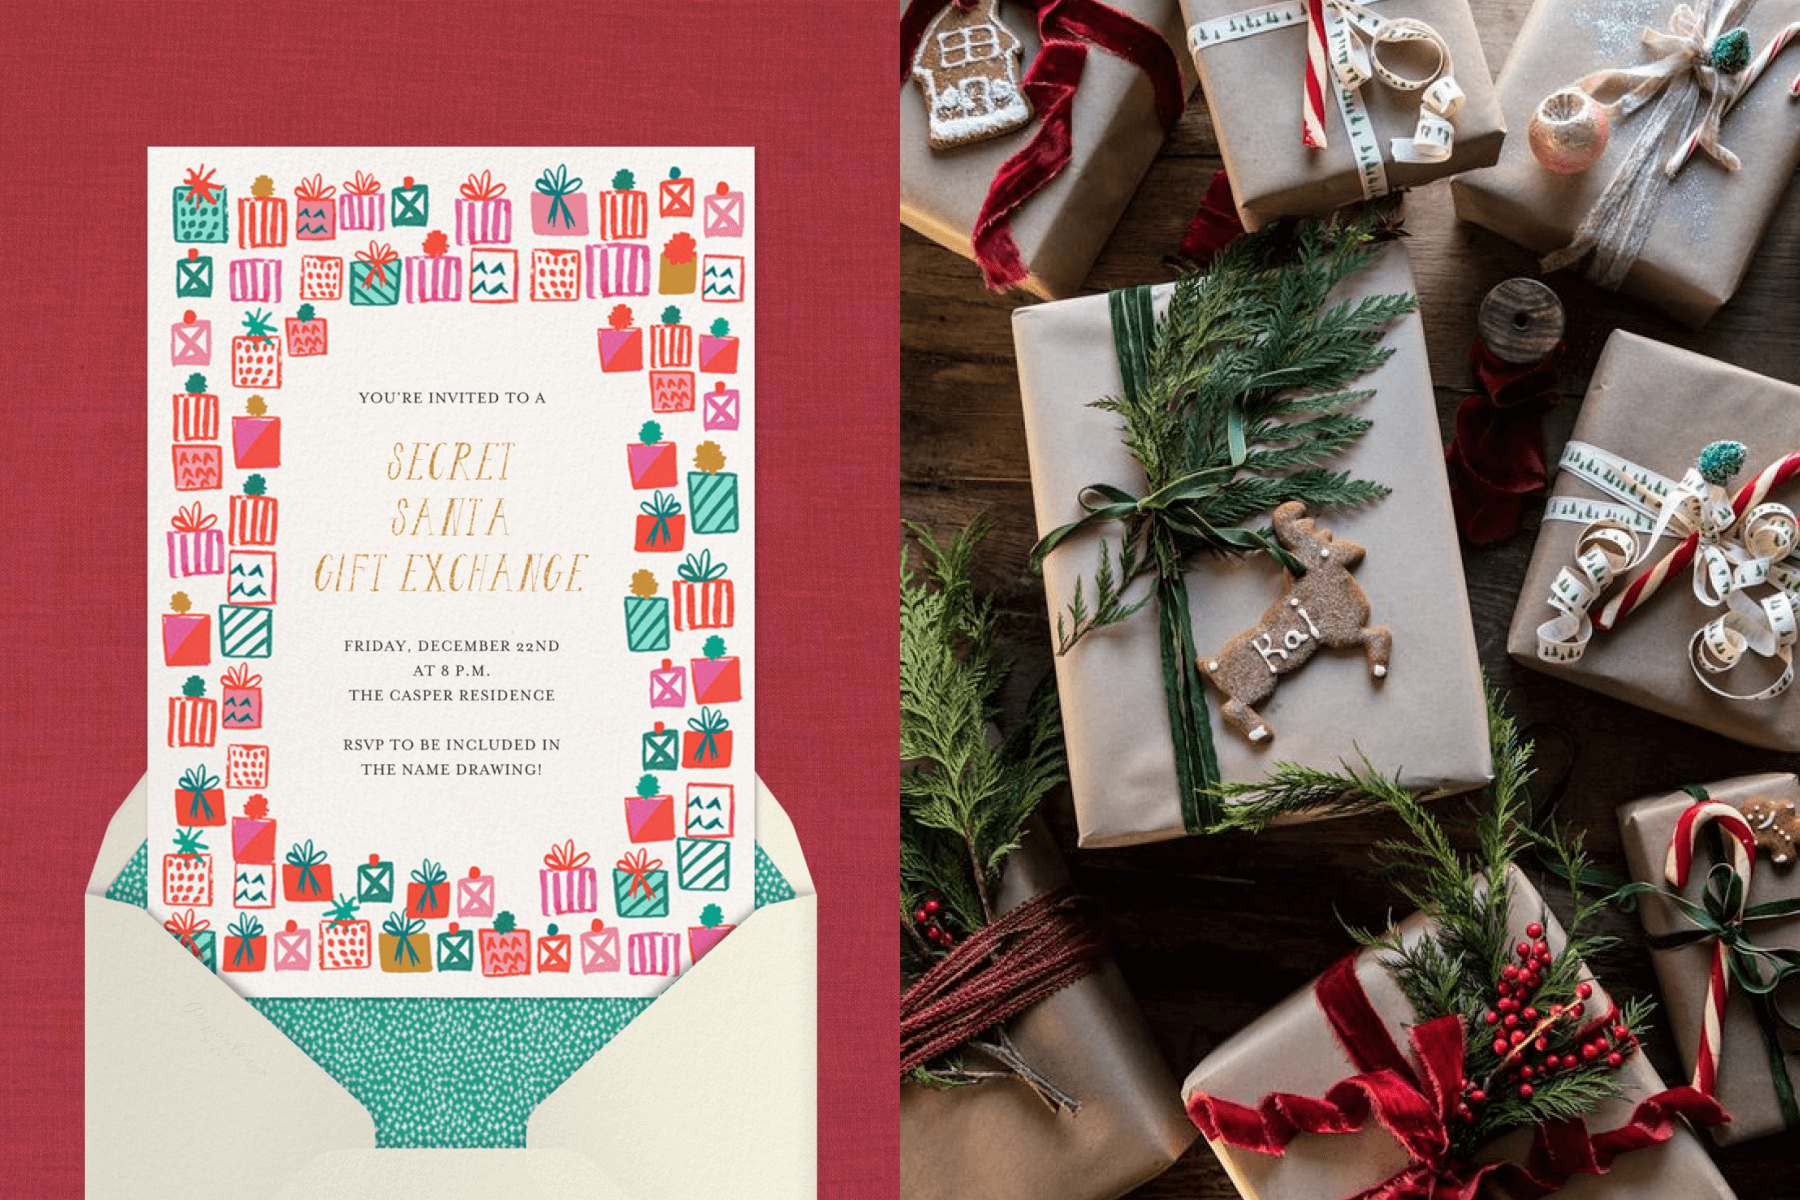 Left: A Secret Santa invitation with an illustrated border of red, green, and pink holiday gifts; right: An overhead photograph of holiday presents wrappedin craft paper and decorated with greenery and candy canes.